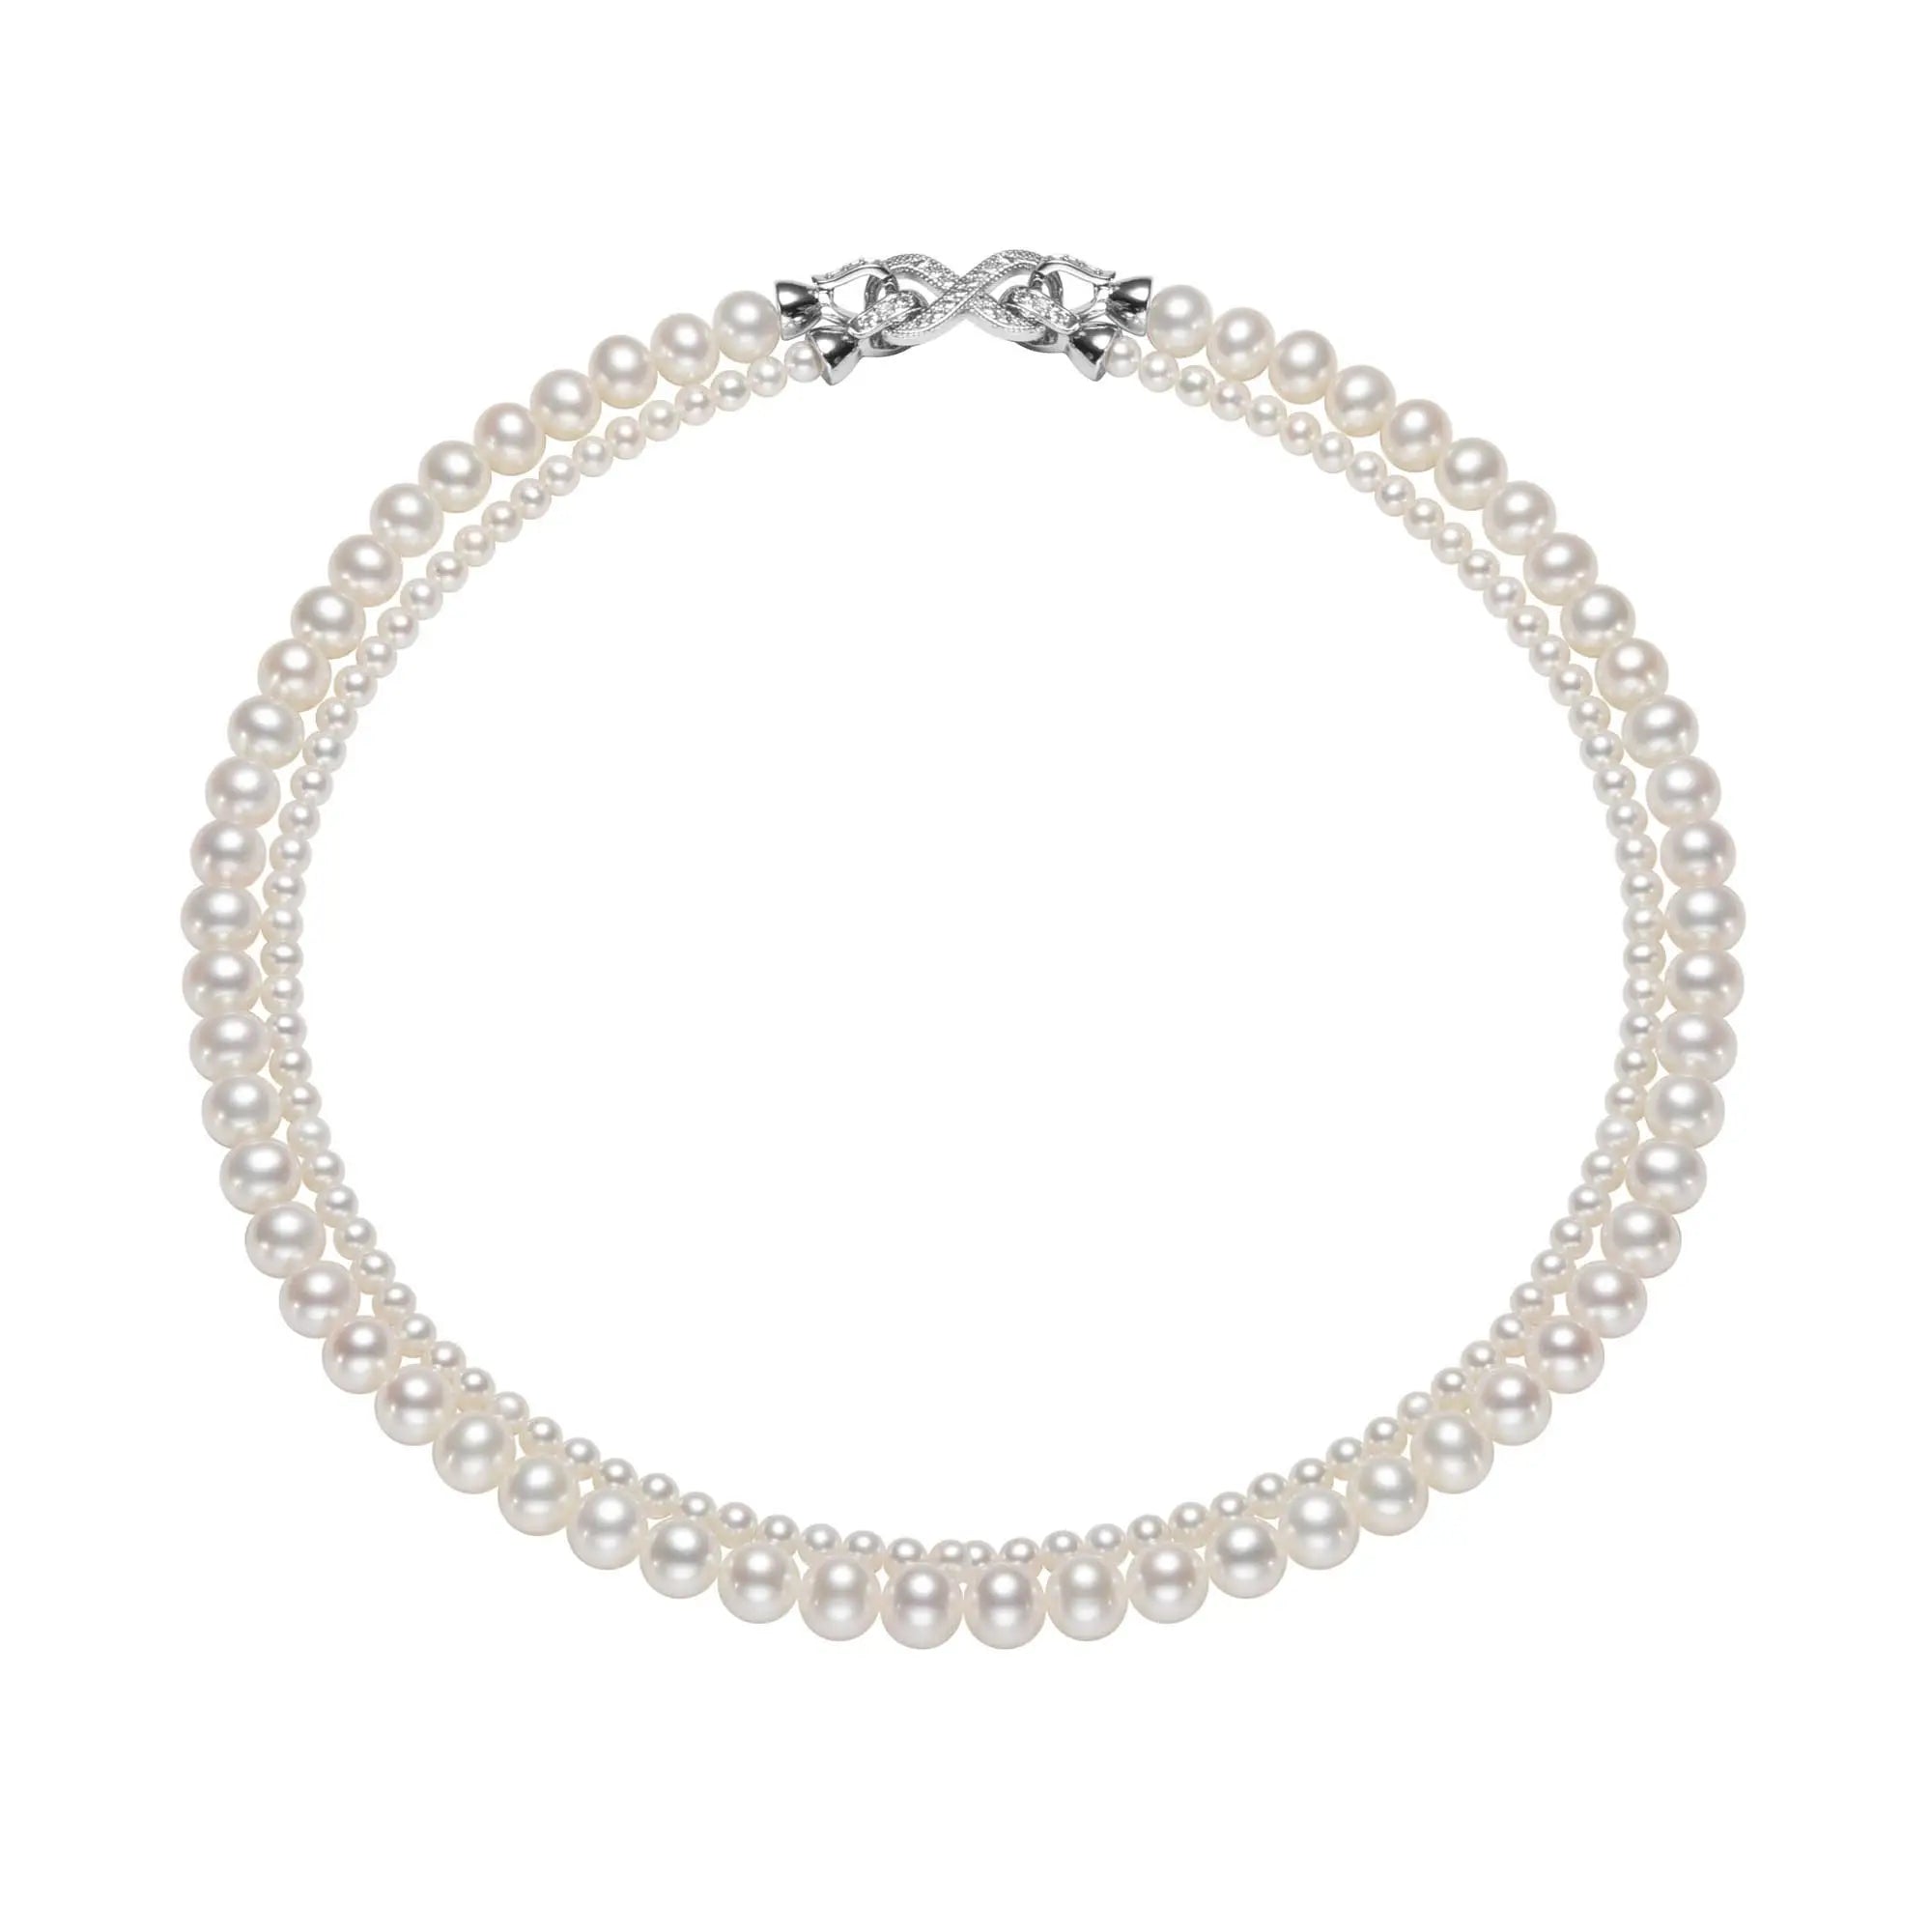 Unbounded Love 5-in-1 Timeless Pearl Necklace